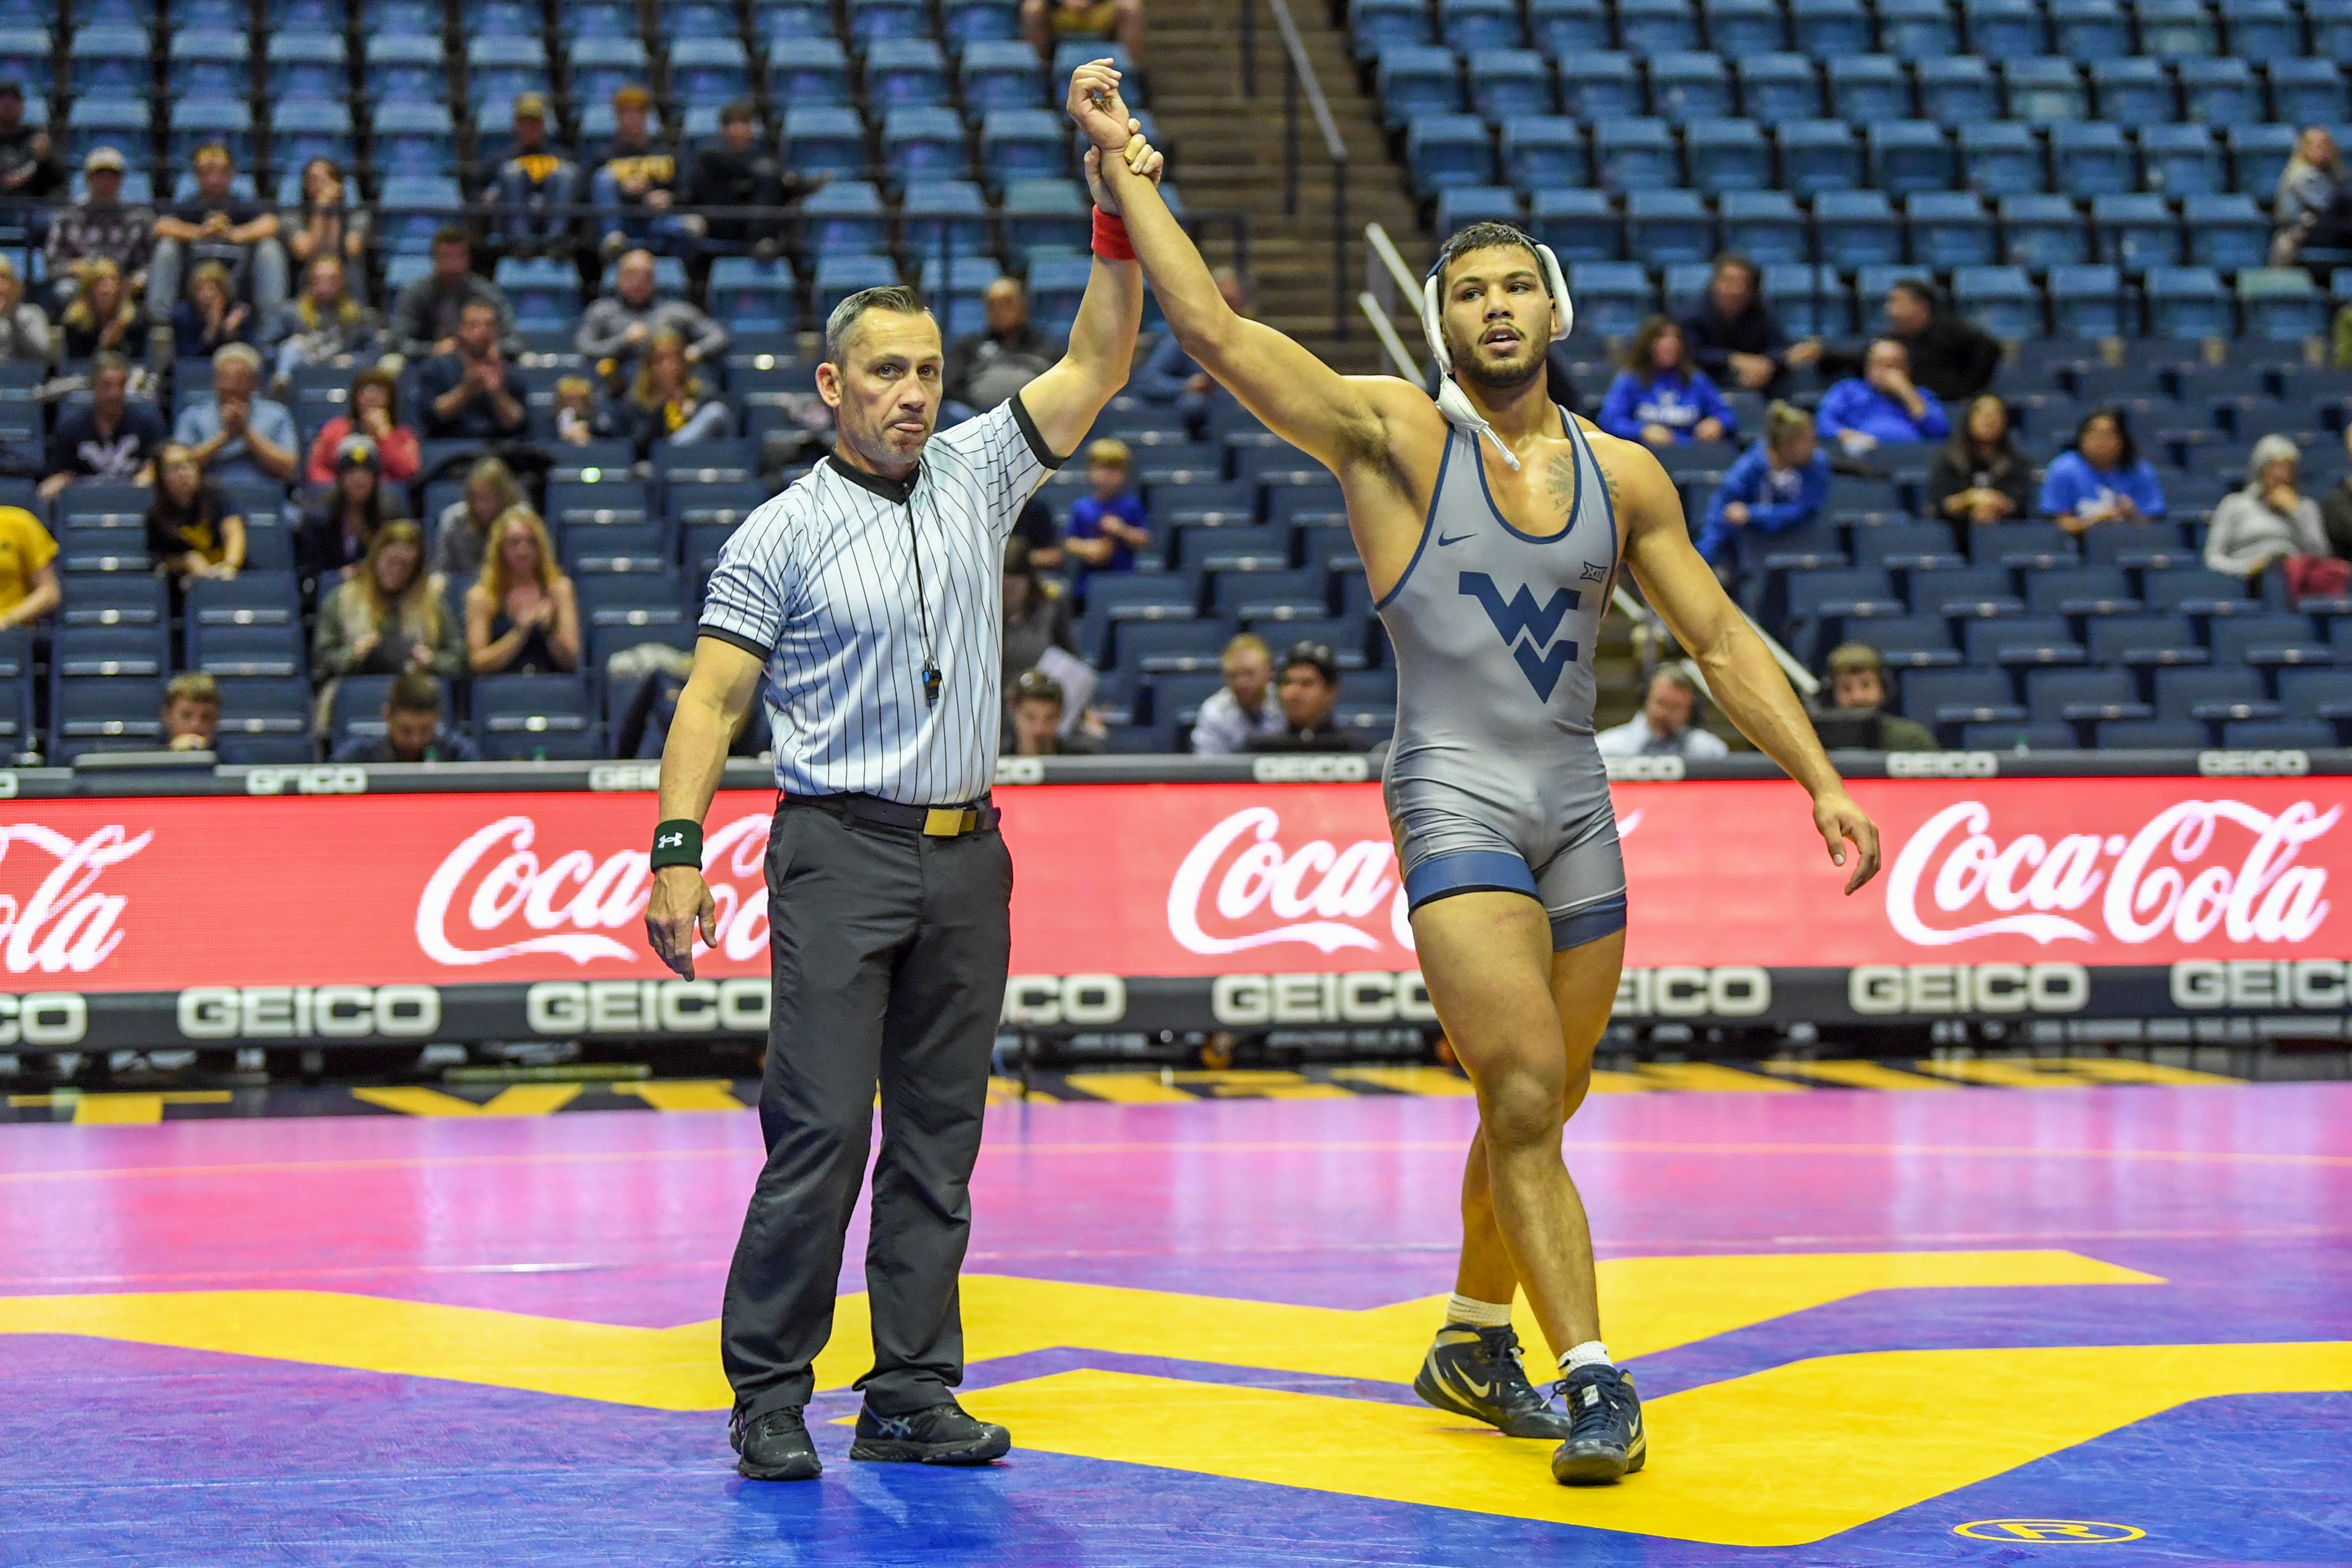 WVU wrestlers prep for nationals